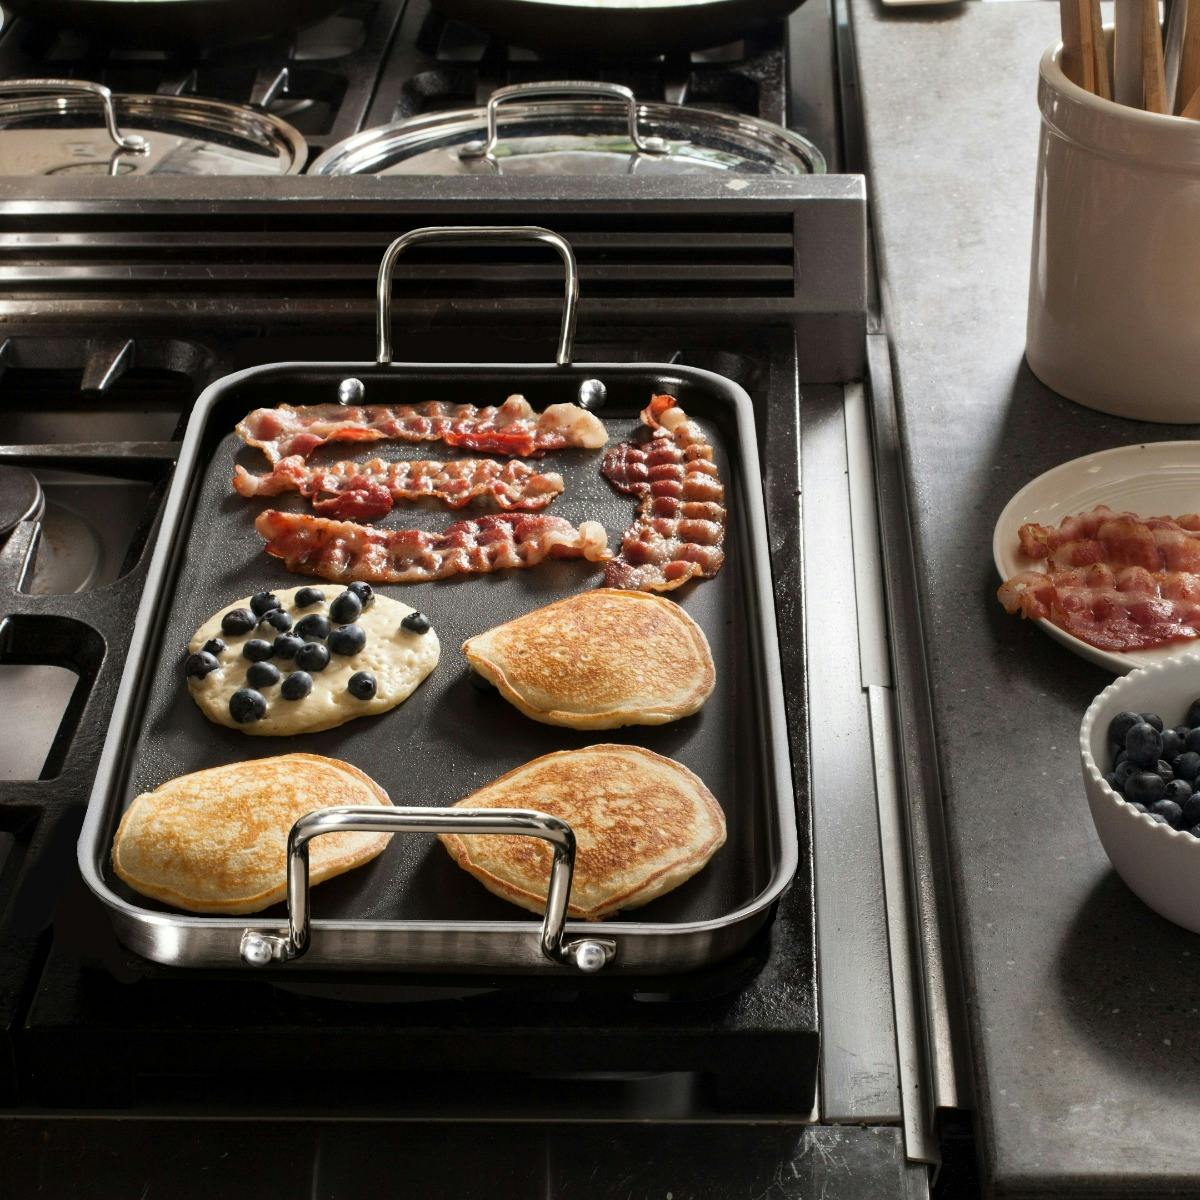 CLASSIC Double Burner Griddle